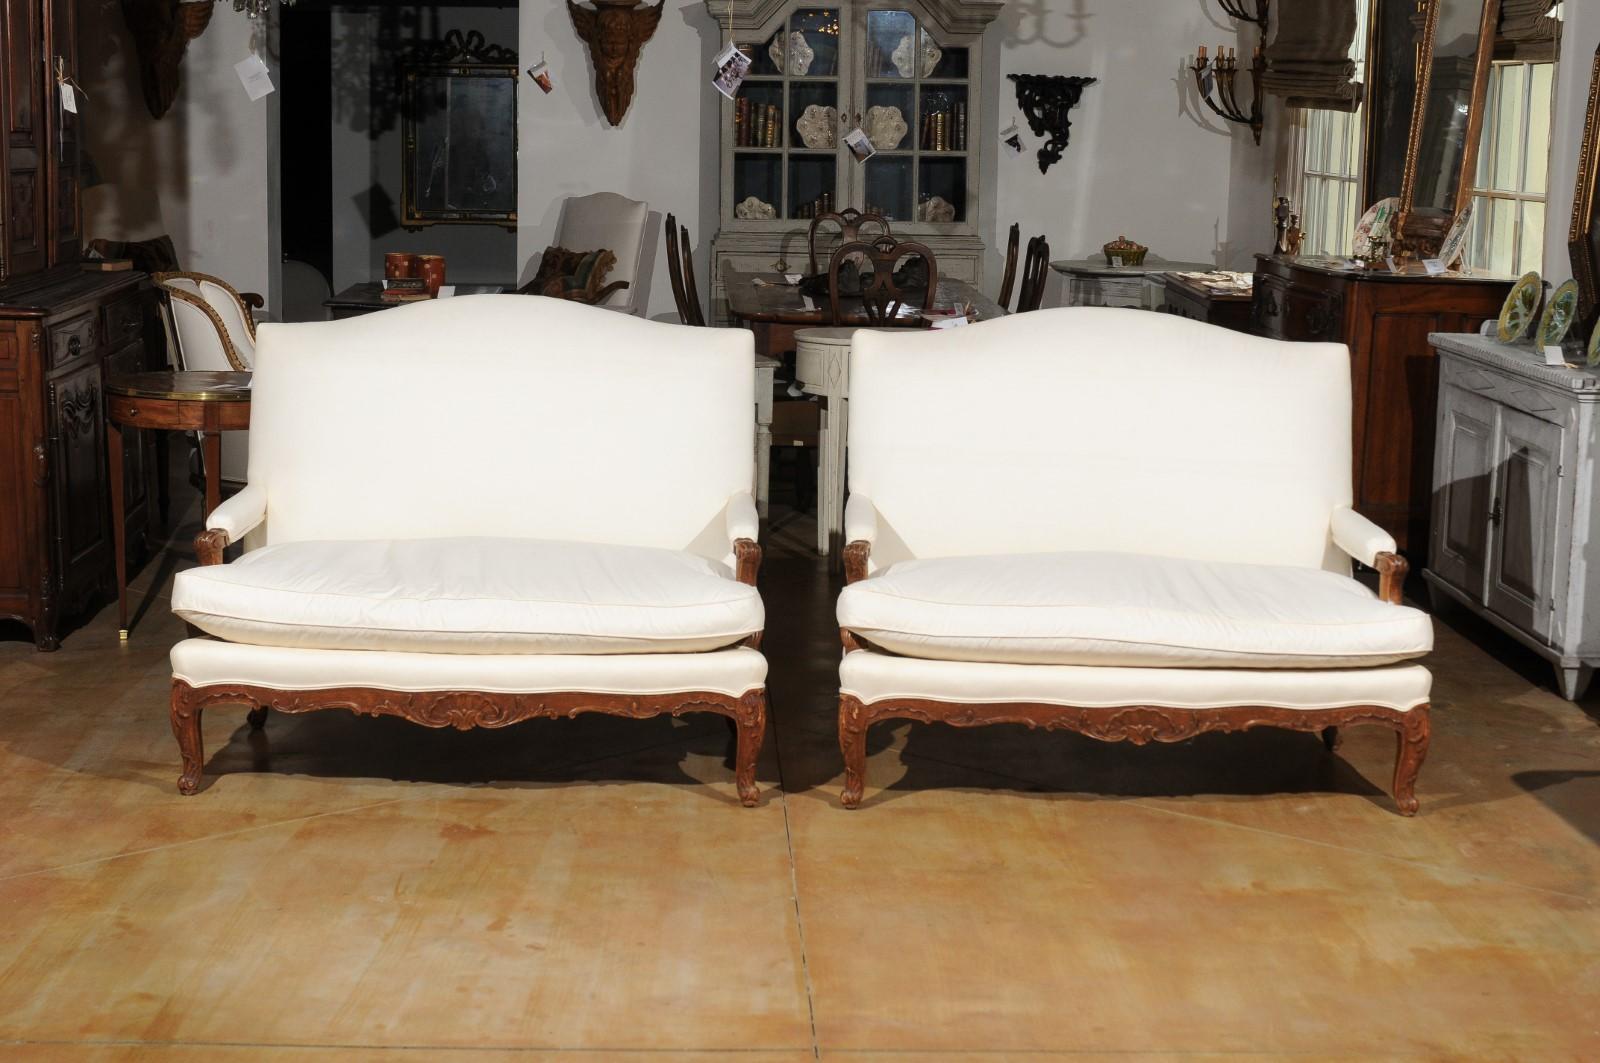 Upholstery Pair of 19th Century French Régence Style Upholstered Canapés with Cabriole Legs